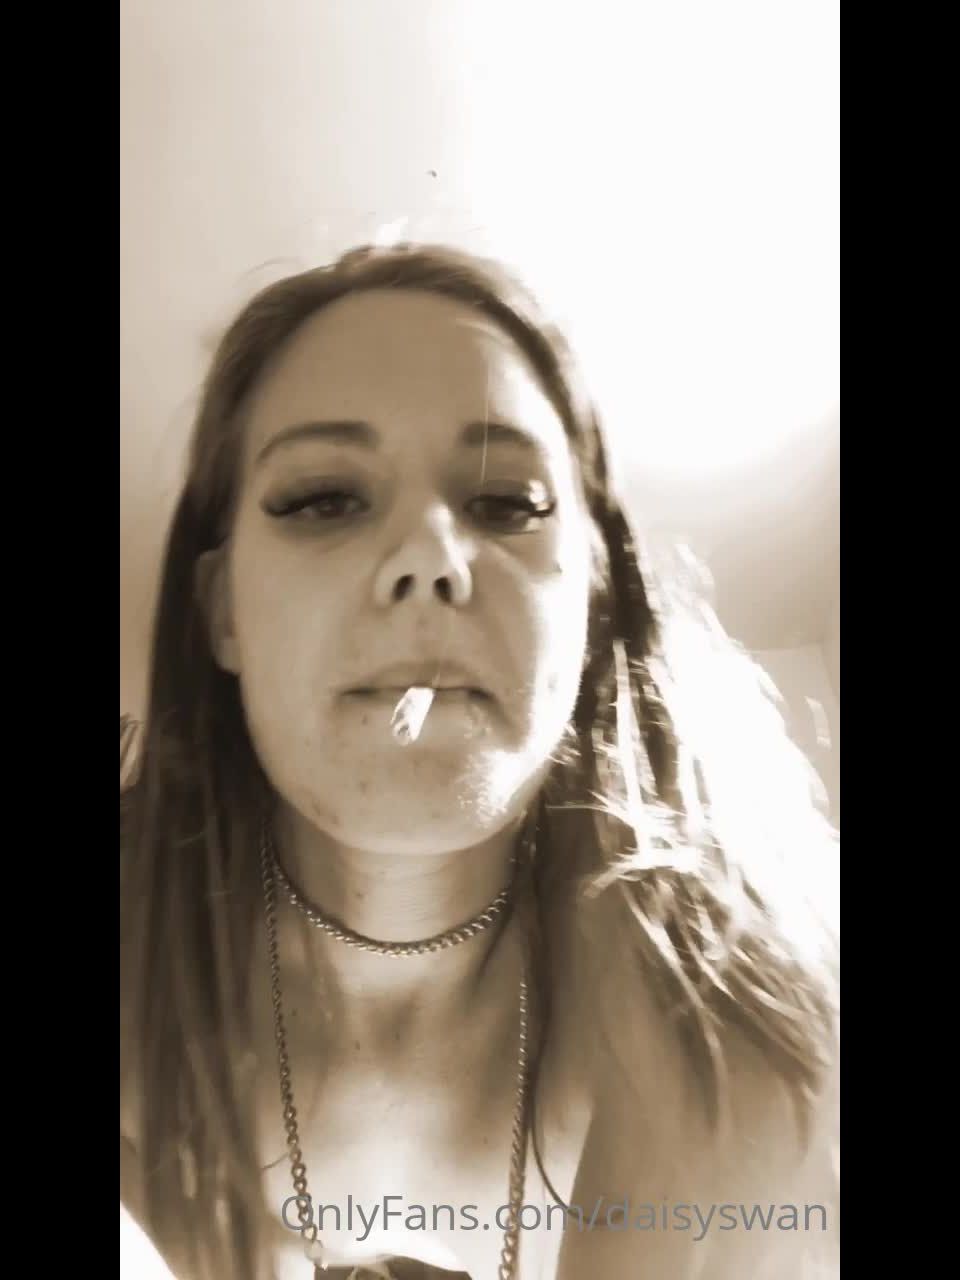 Daisy Swan () Daisyswan - a fan asked me to do a video where i smoke a joint and masturbate which happens to be my 14-10-2020